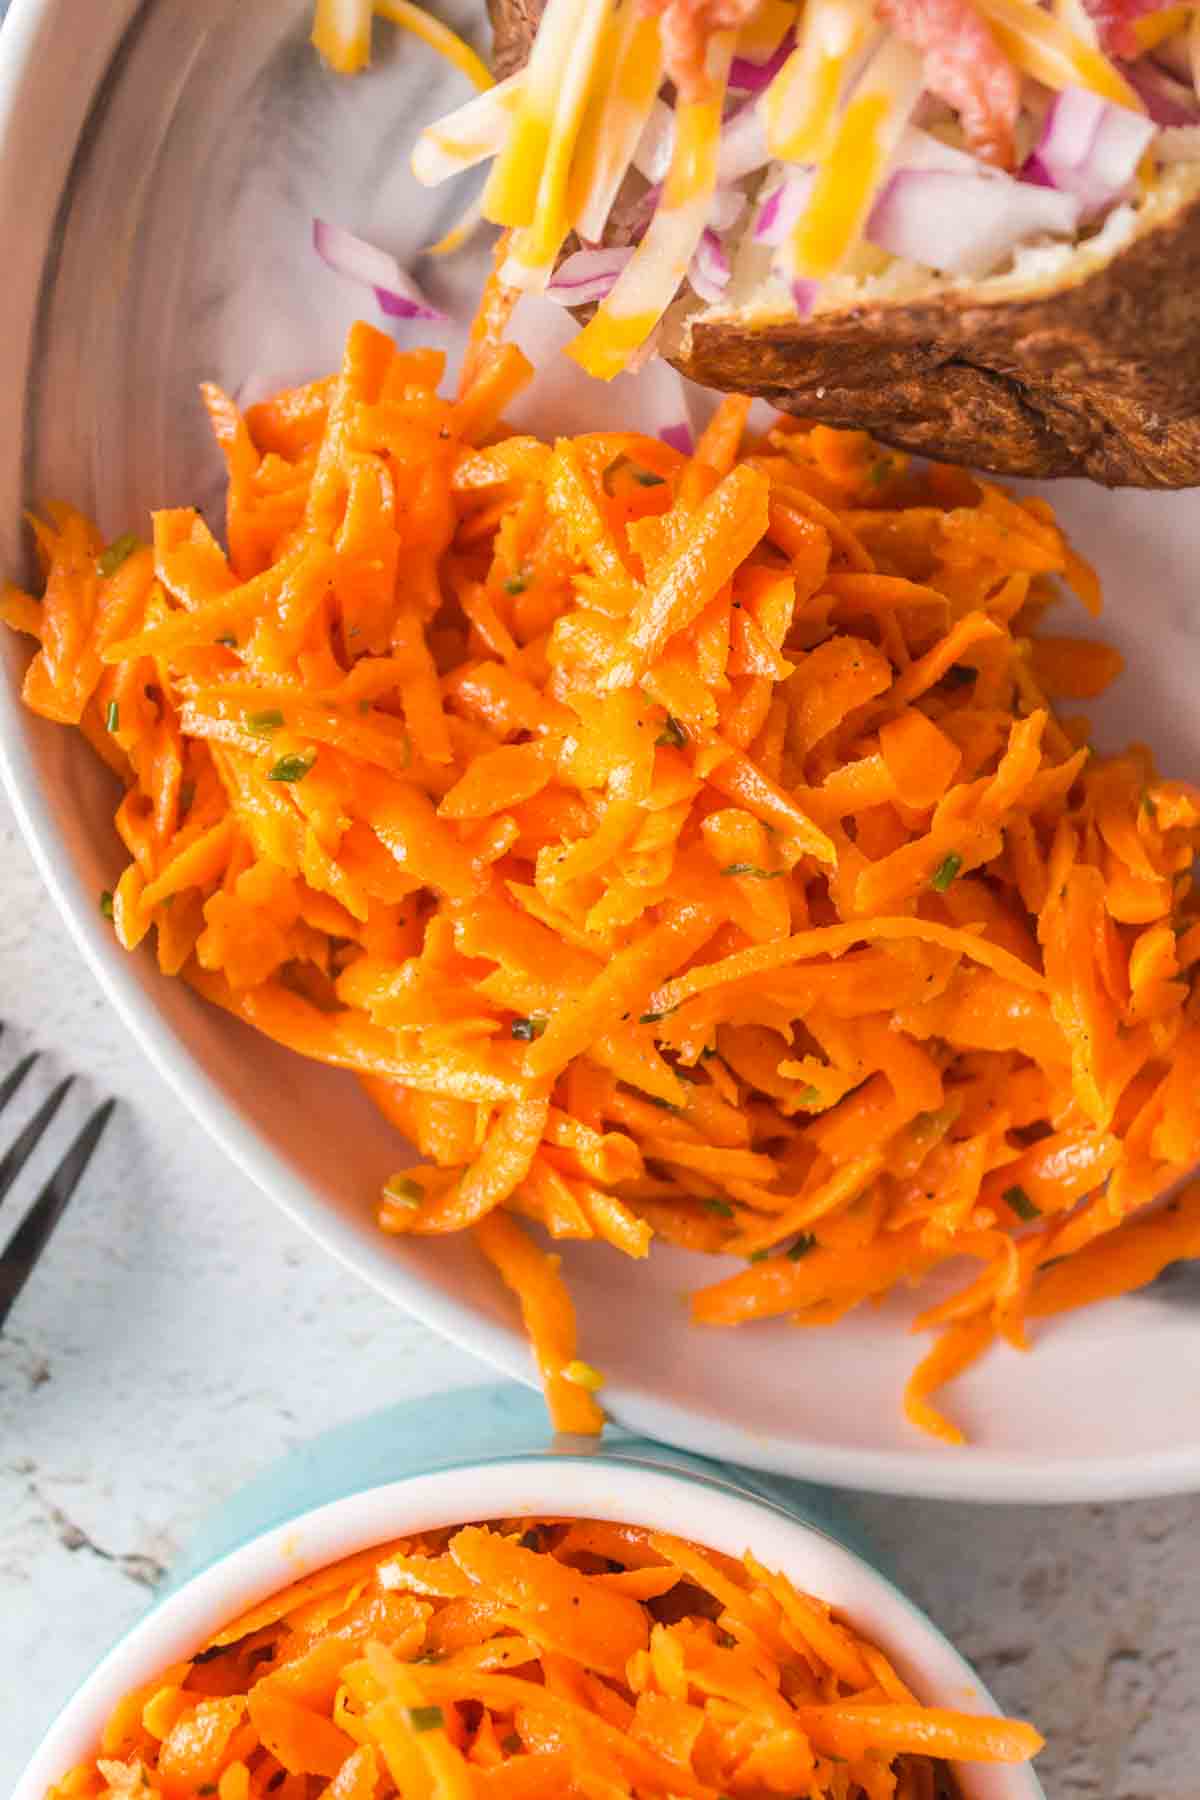 shredded carrot salad on a plate with meat